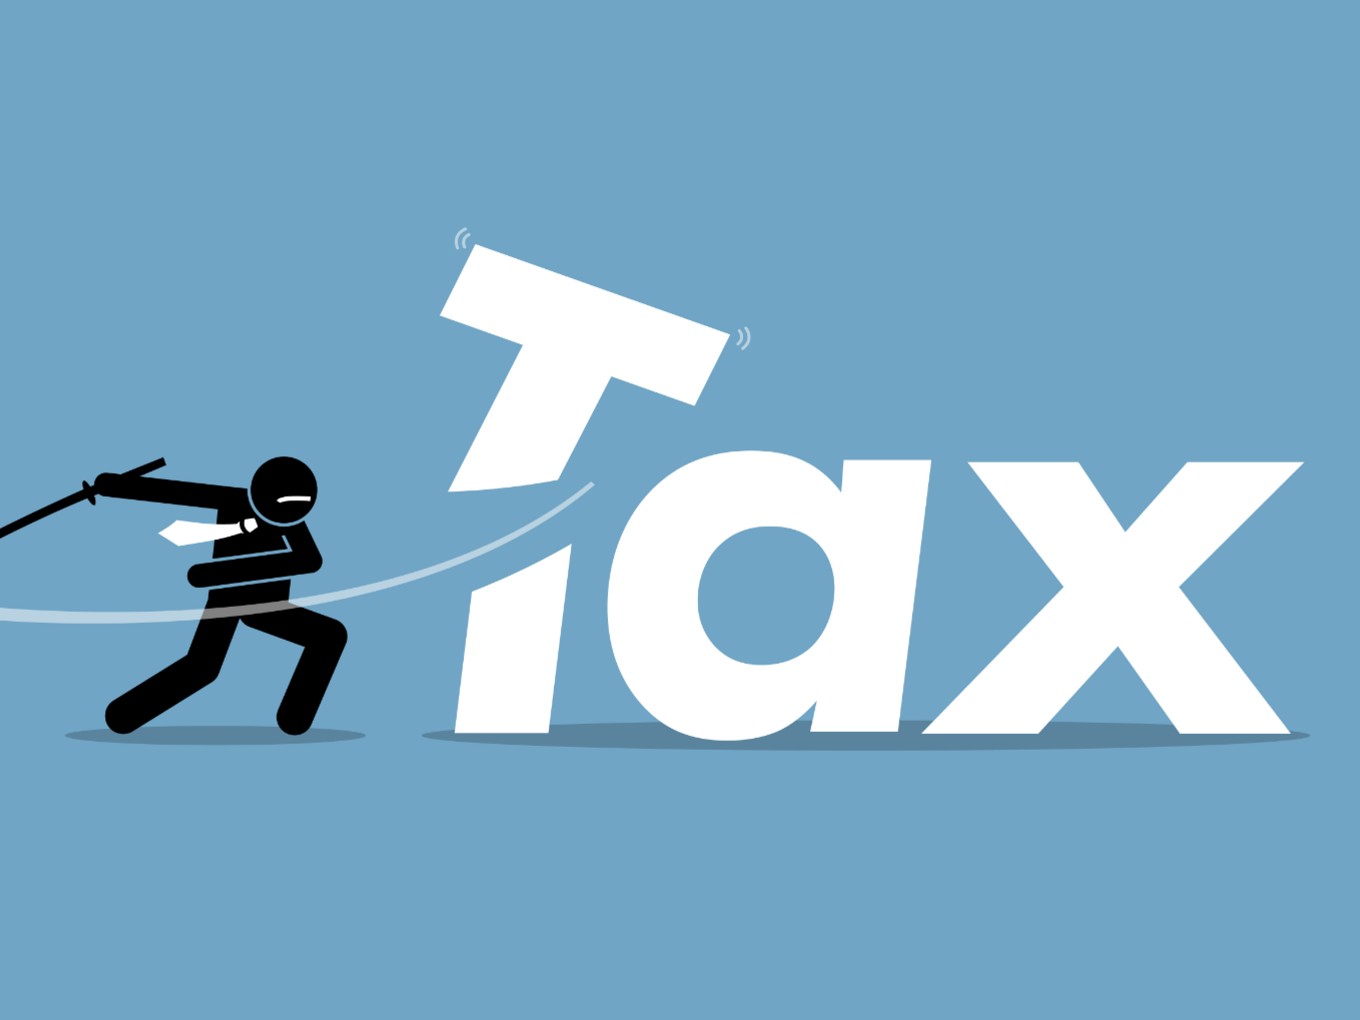 startups - Indian entrepreneurs- Angel Tax Post Budget 2019: Will There Finally Be Relief Without Restrictions?